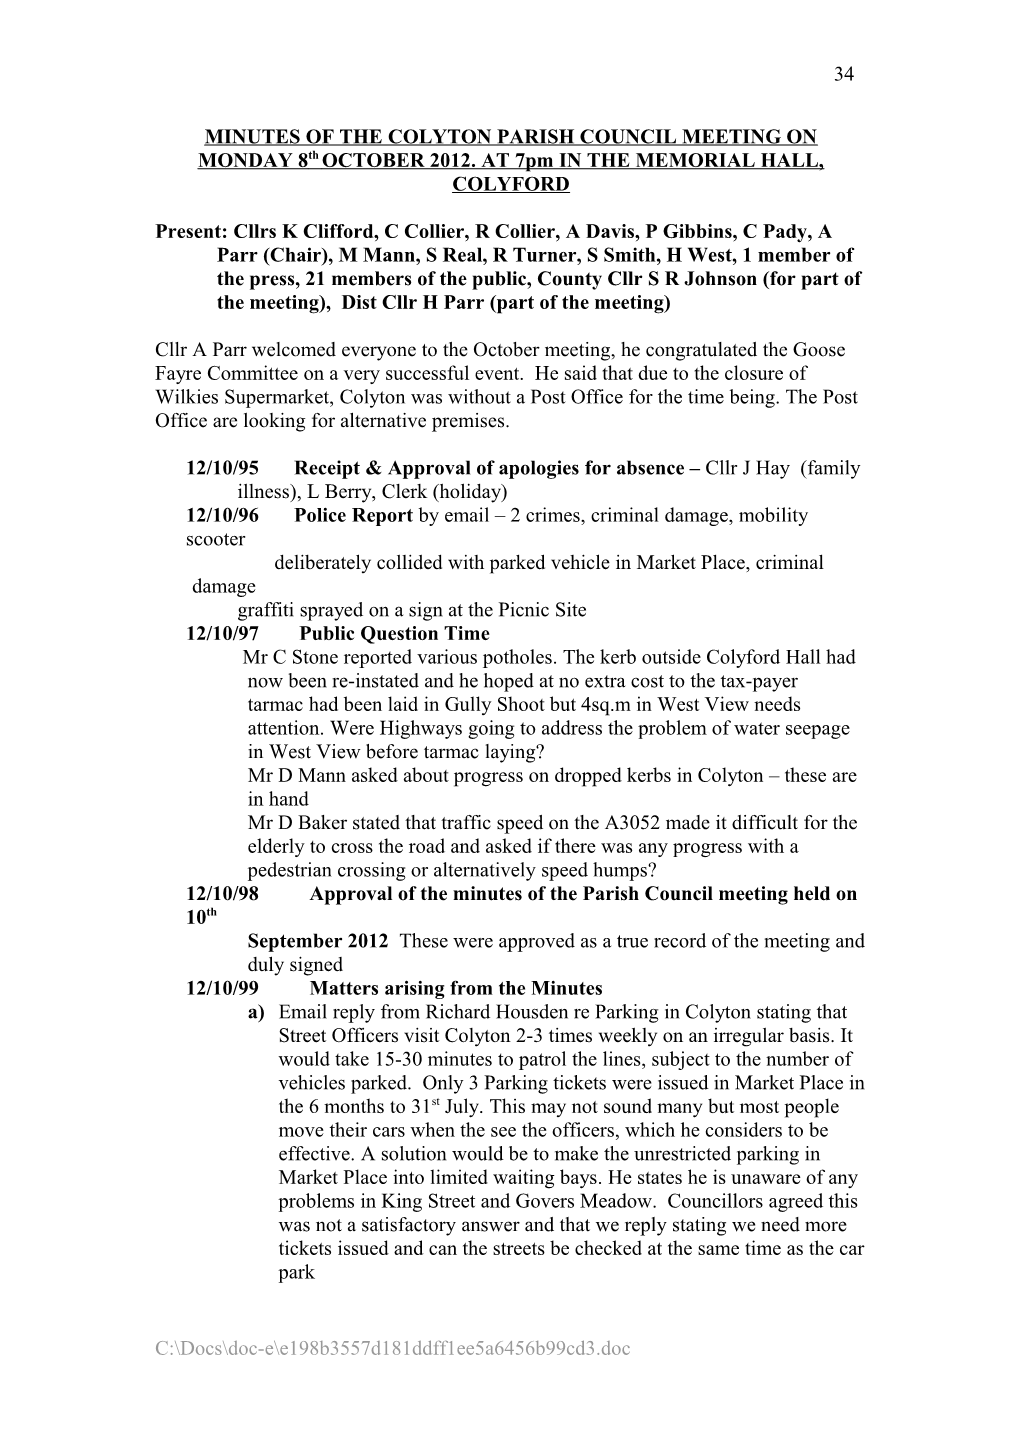 MINUTES of the COLYTON PARISH COUNCIL MEETING on MONDAY 8Th OCTOBER 2012